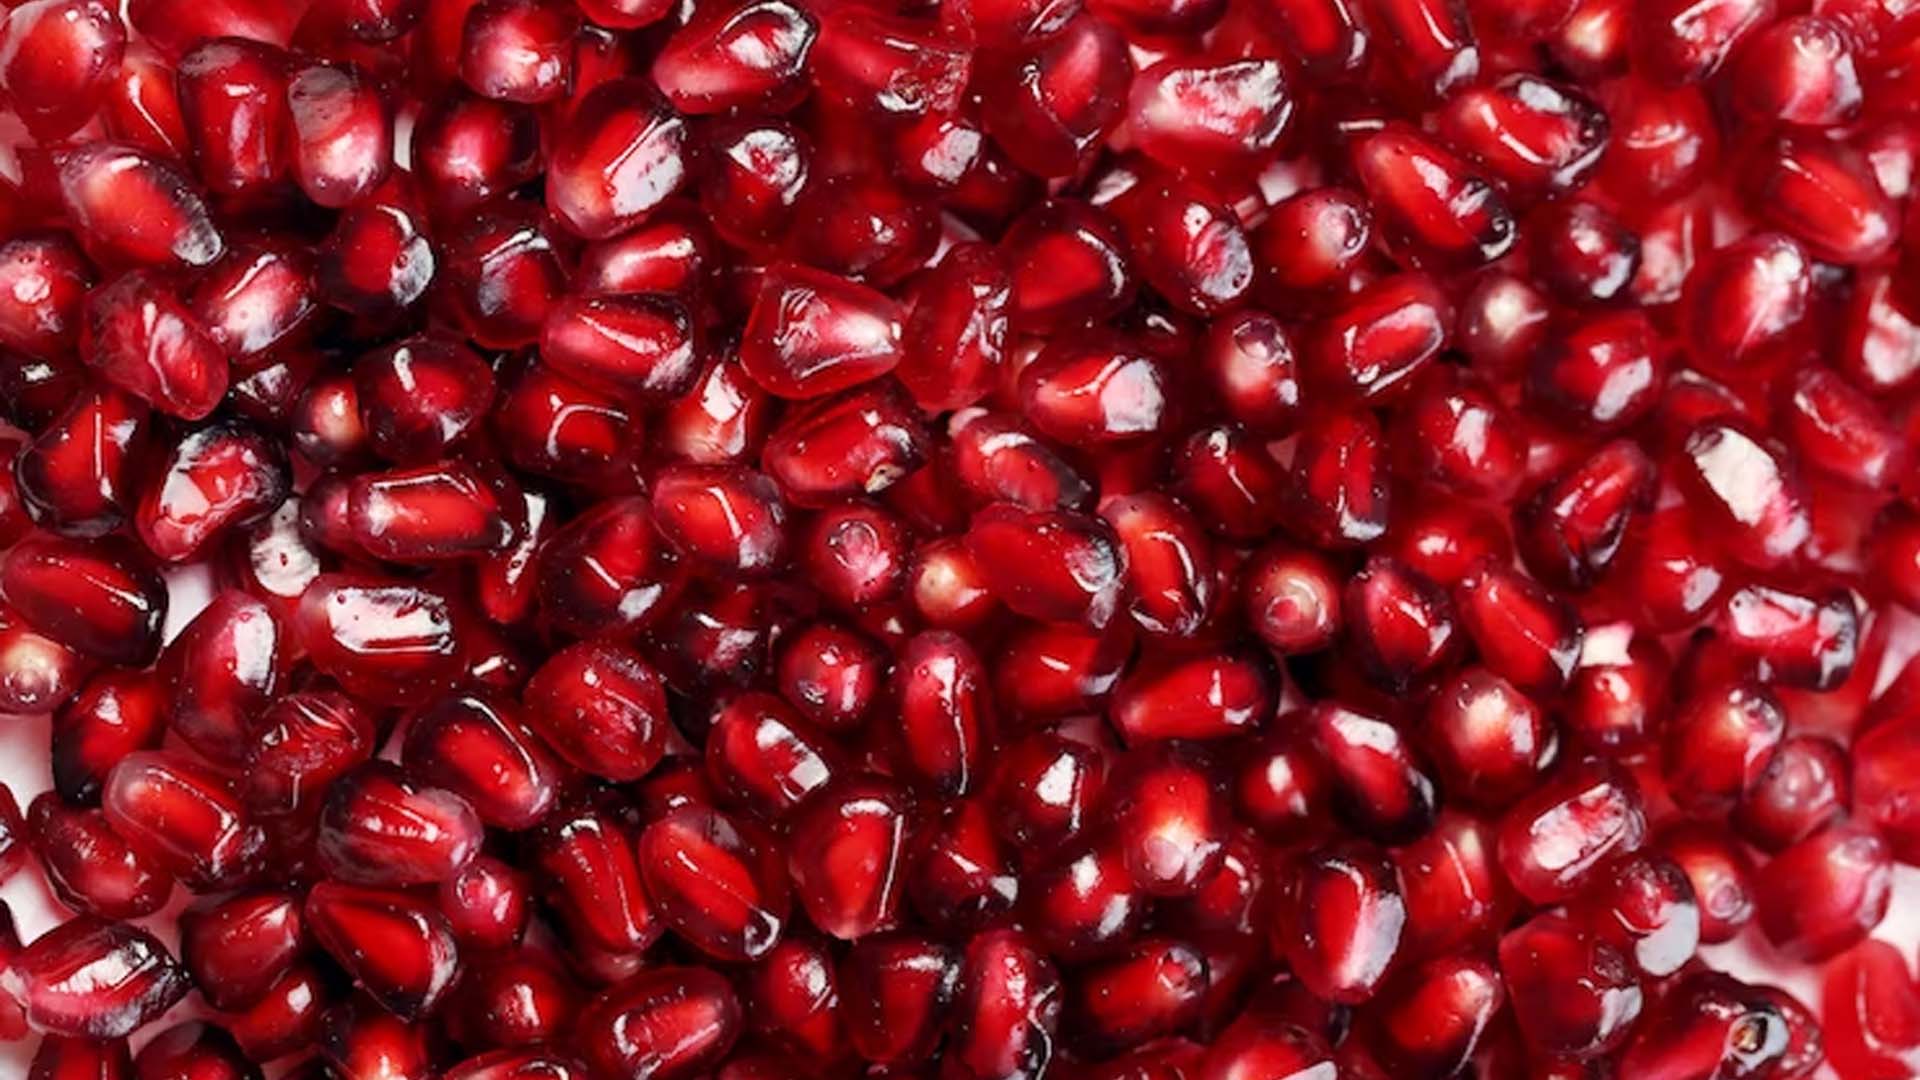 Health Benefits of Eating Pomegranate Seeds